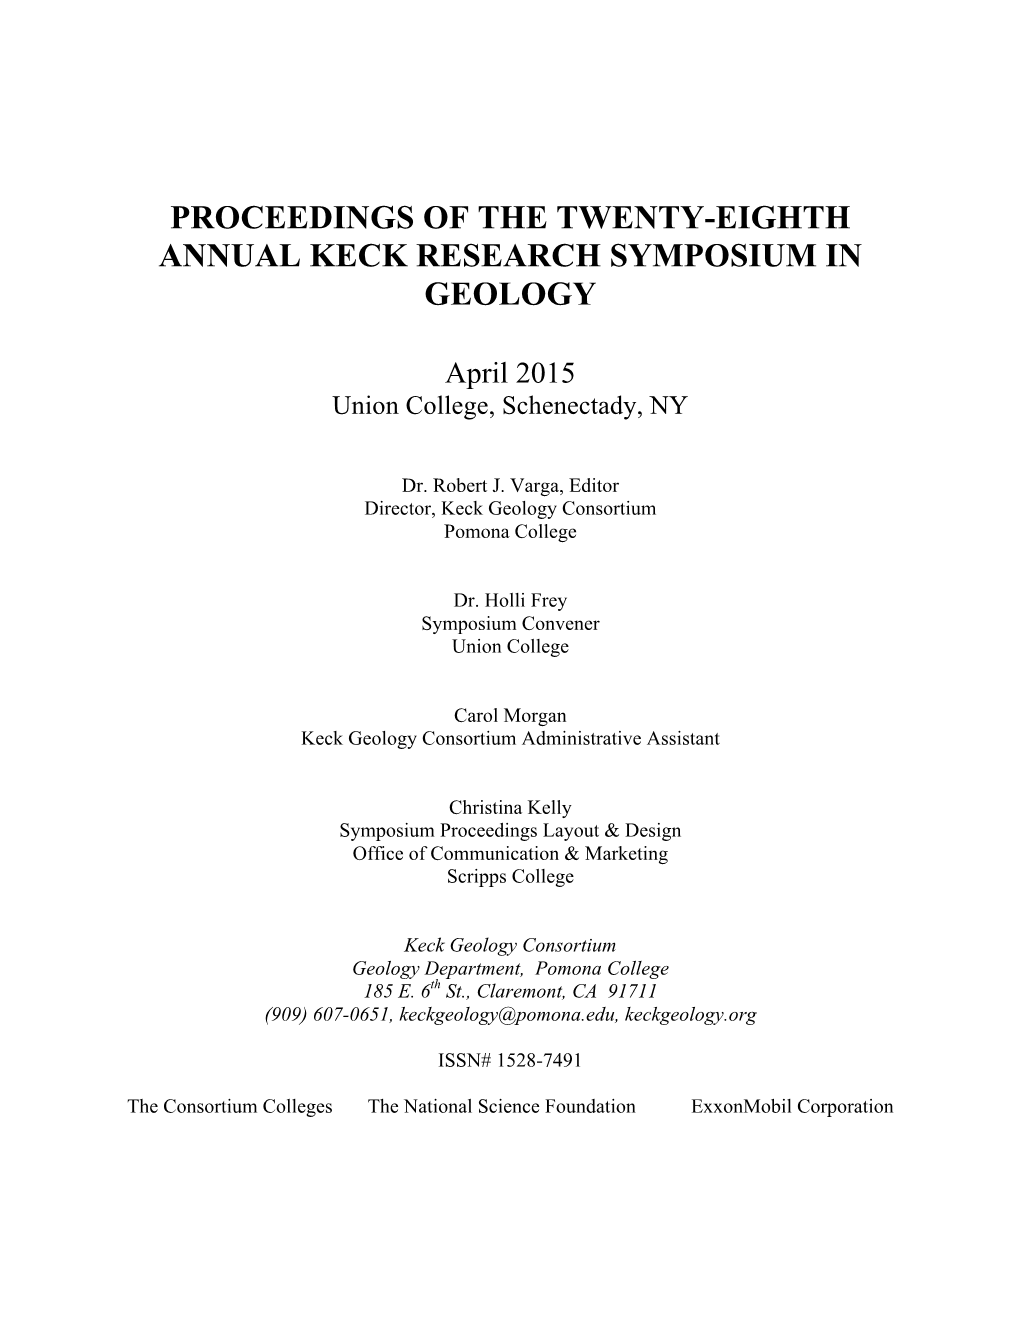 Proceedings of the Twenty-Eighth Annual Keck Research Symposium in Geology